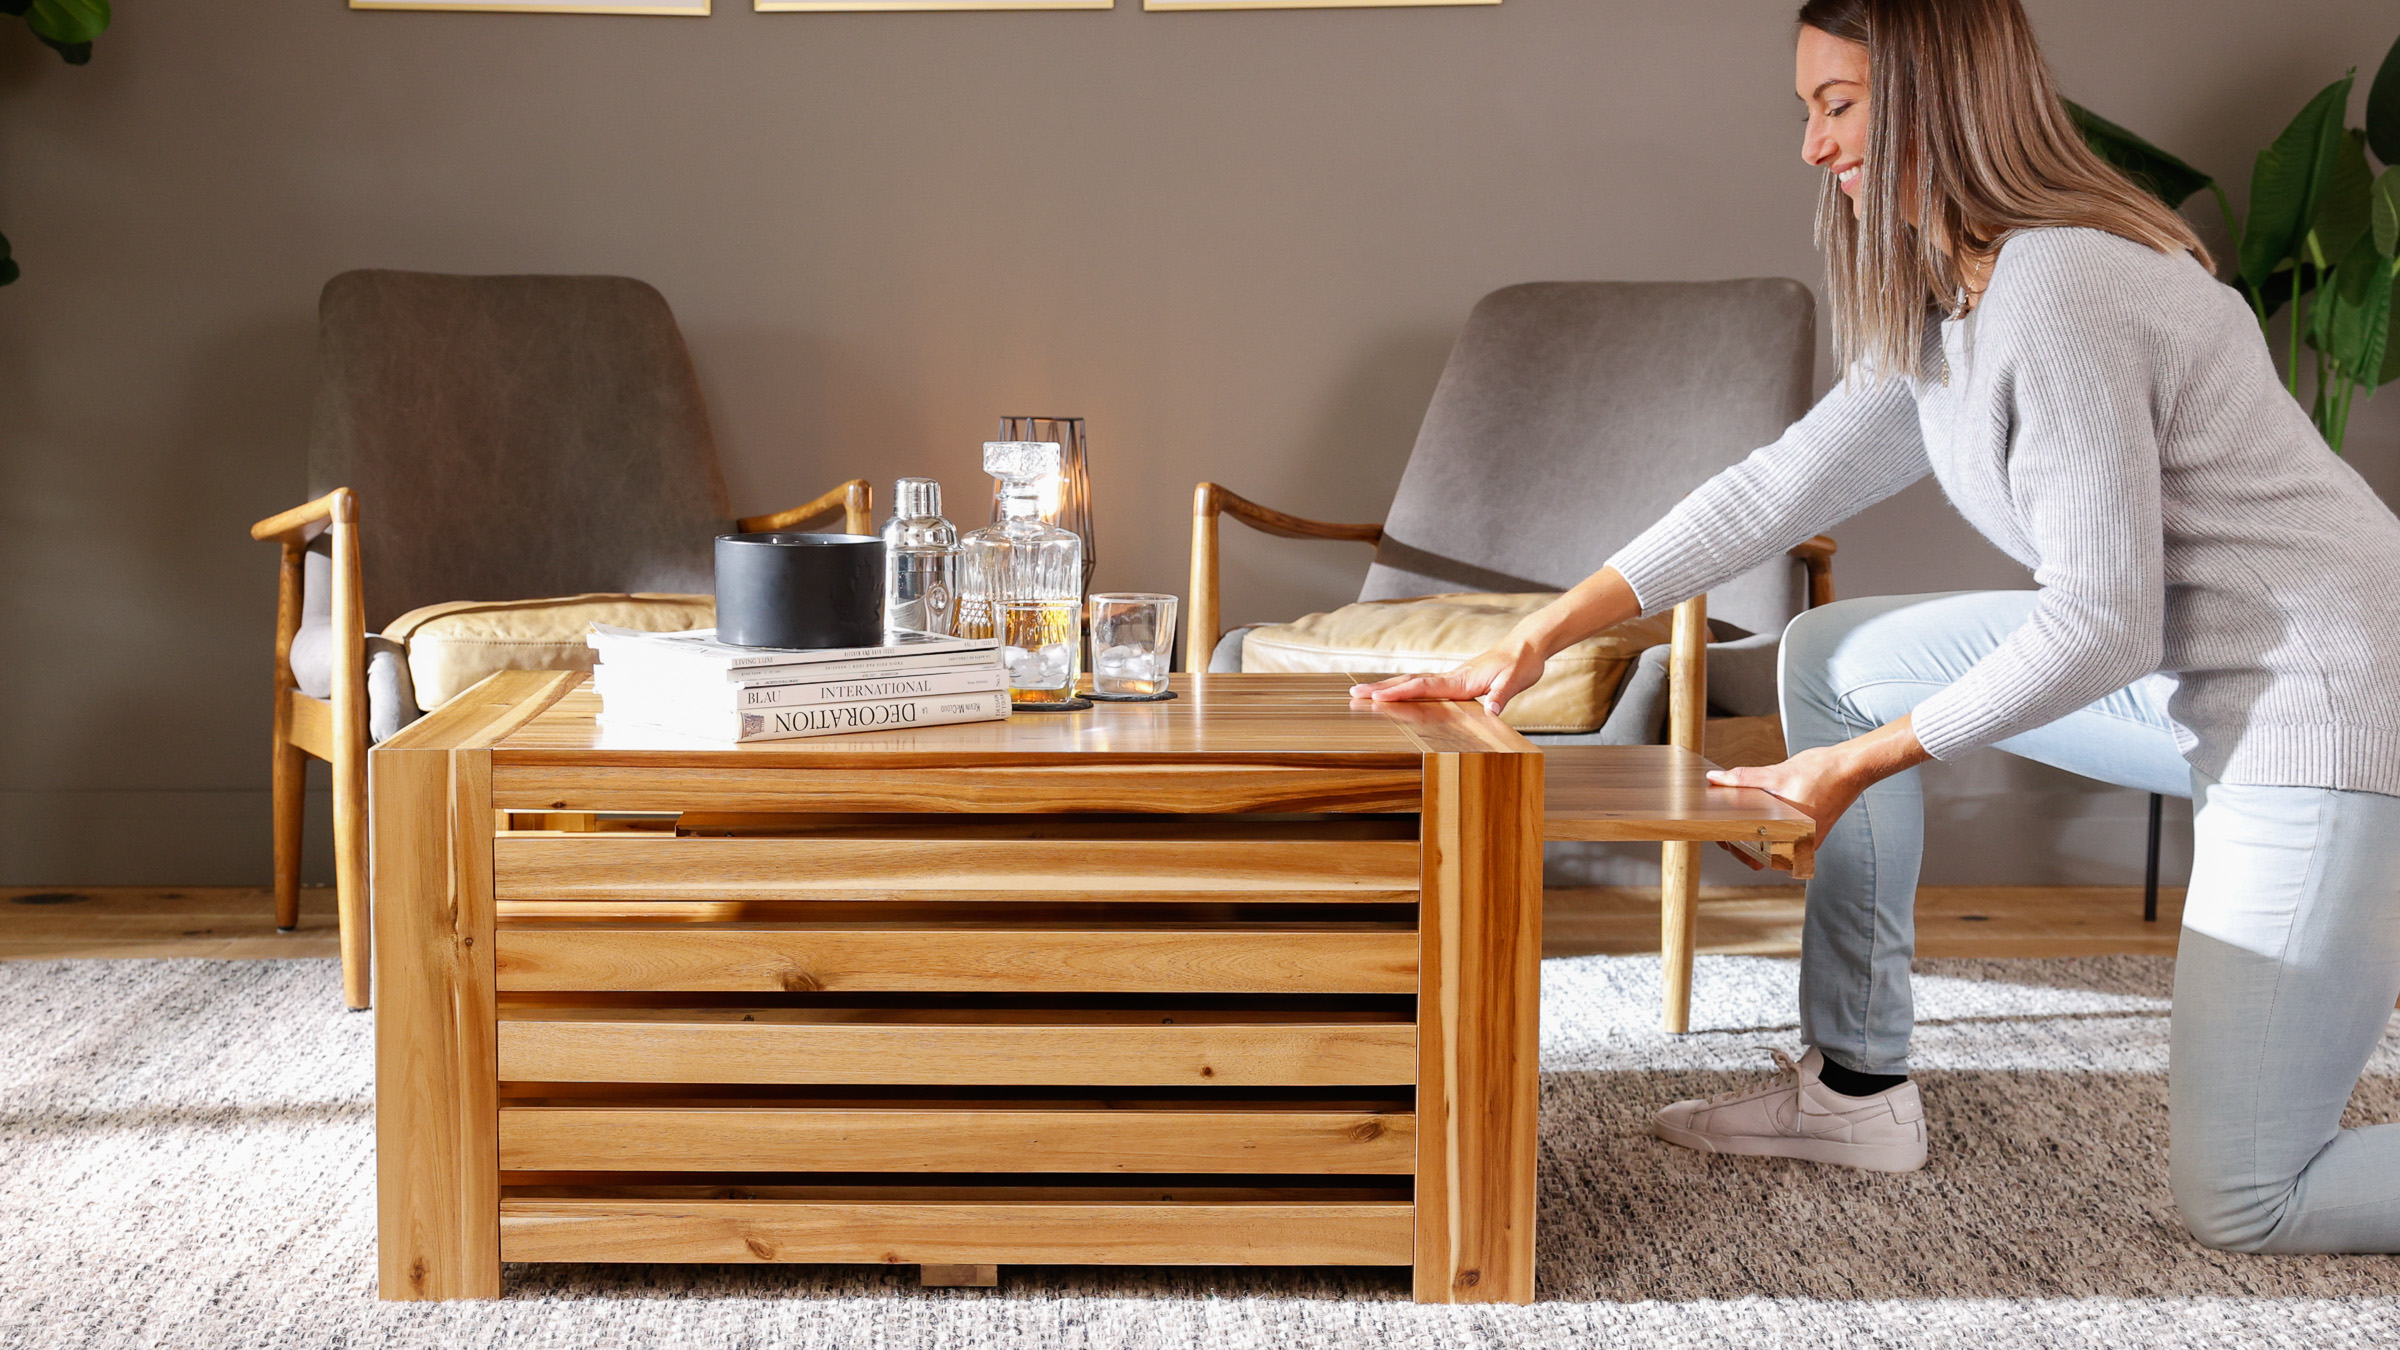 A lady looking at a wooden coffee table